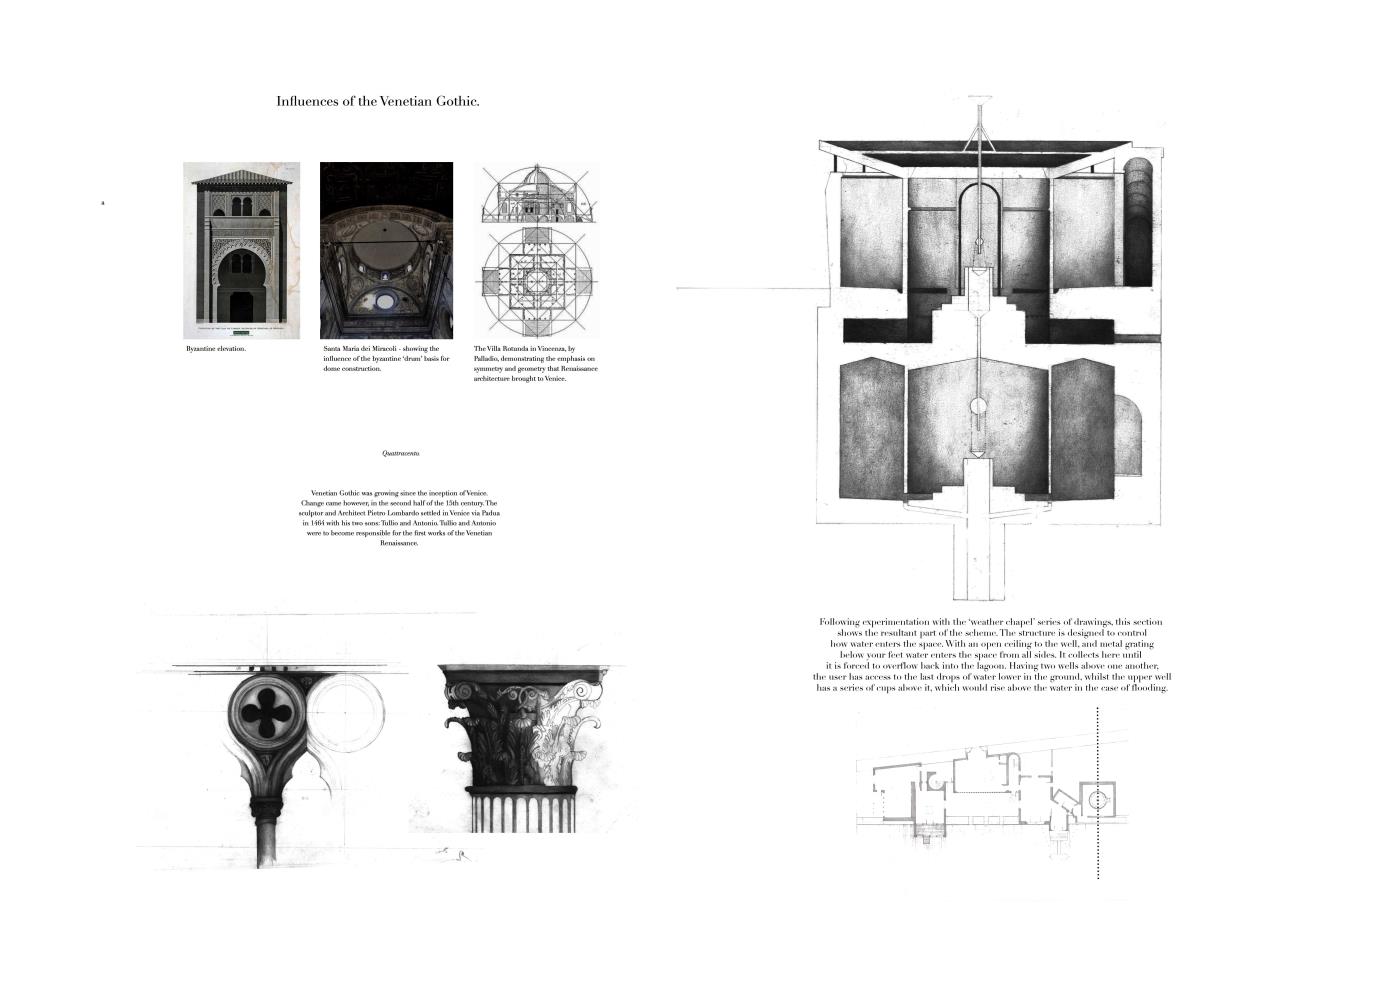 The Elements of Style: An Encyclopedia of Domestic Architectural Detail